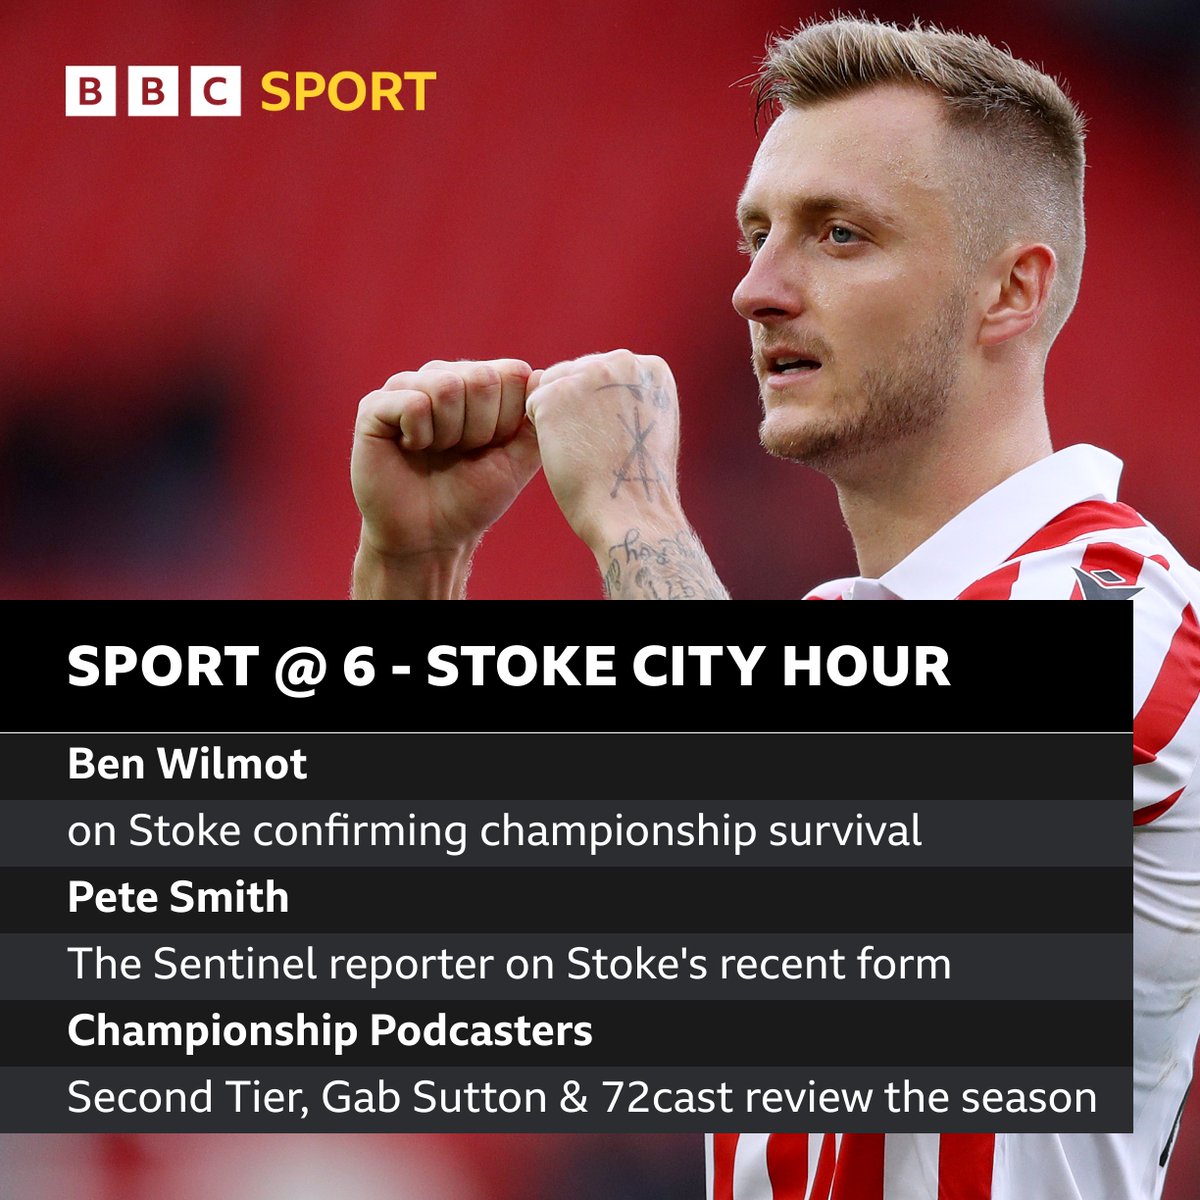 🚨 Sport @ 6🚨 🔴⚪It's Stoke City night on @BBCRadioStoke 📻Join @lucas_yeomans for the build up to the FINAL Stoke match this season ⚽️ @BenWilmot6, @PeteSmith1983, @secondtierpod (@JustinPeach27), @GabSutton, @weare72cast coming up! Listen here⤵️ bbc.co.uk/programmes/p0h…